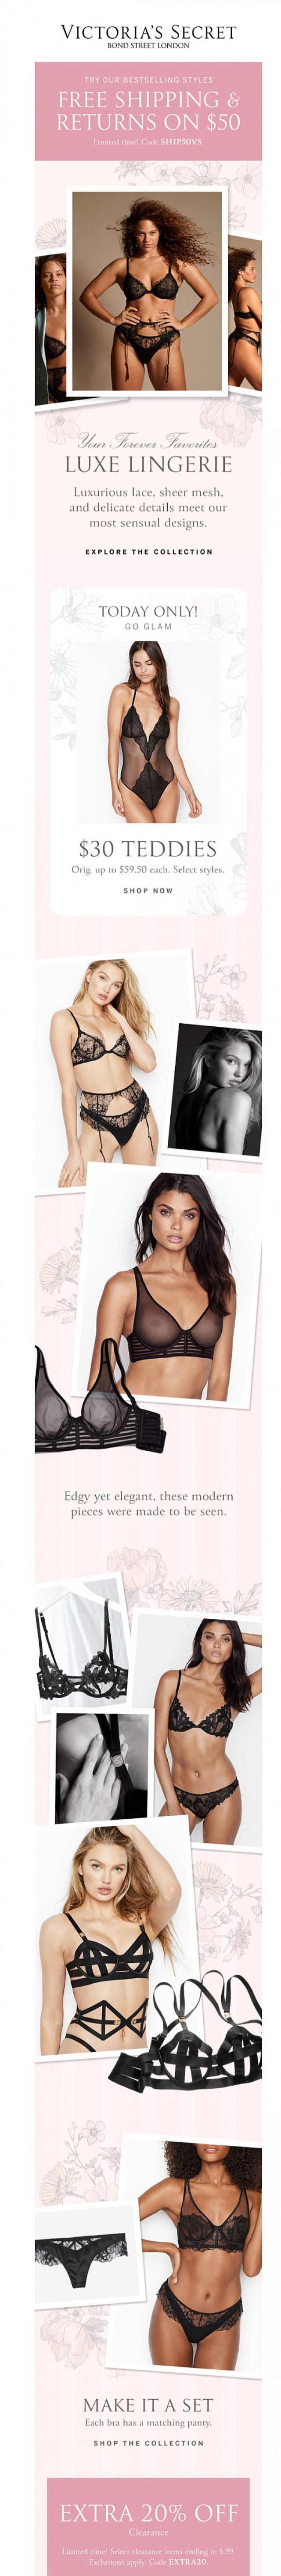 Coupon for: Victoria's Secret - Free Shipping and returns on $50